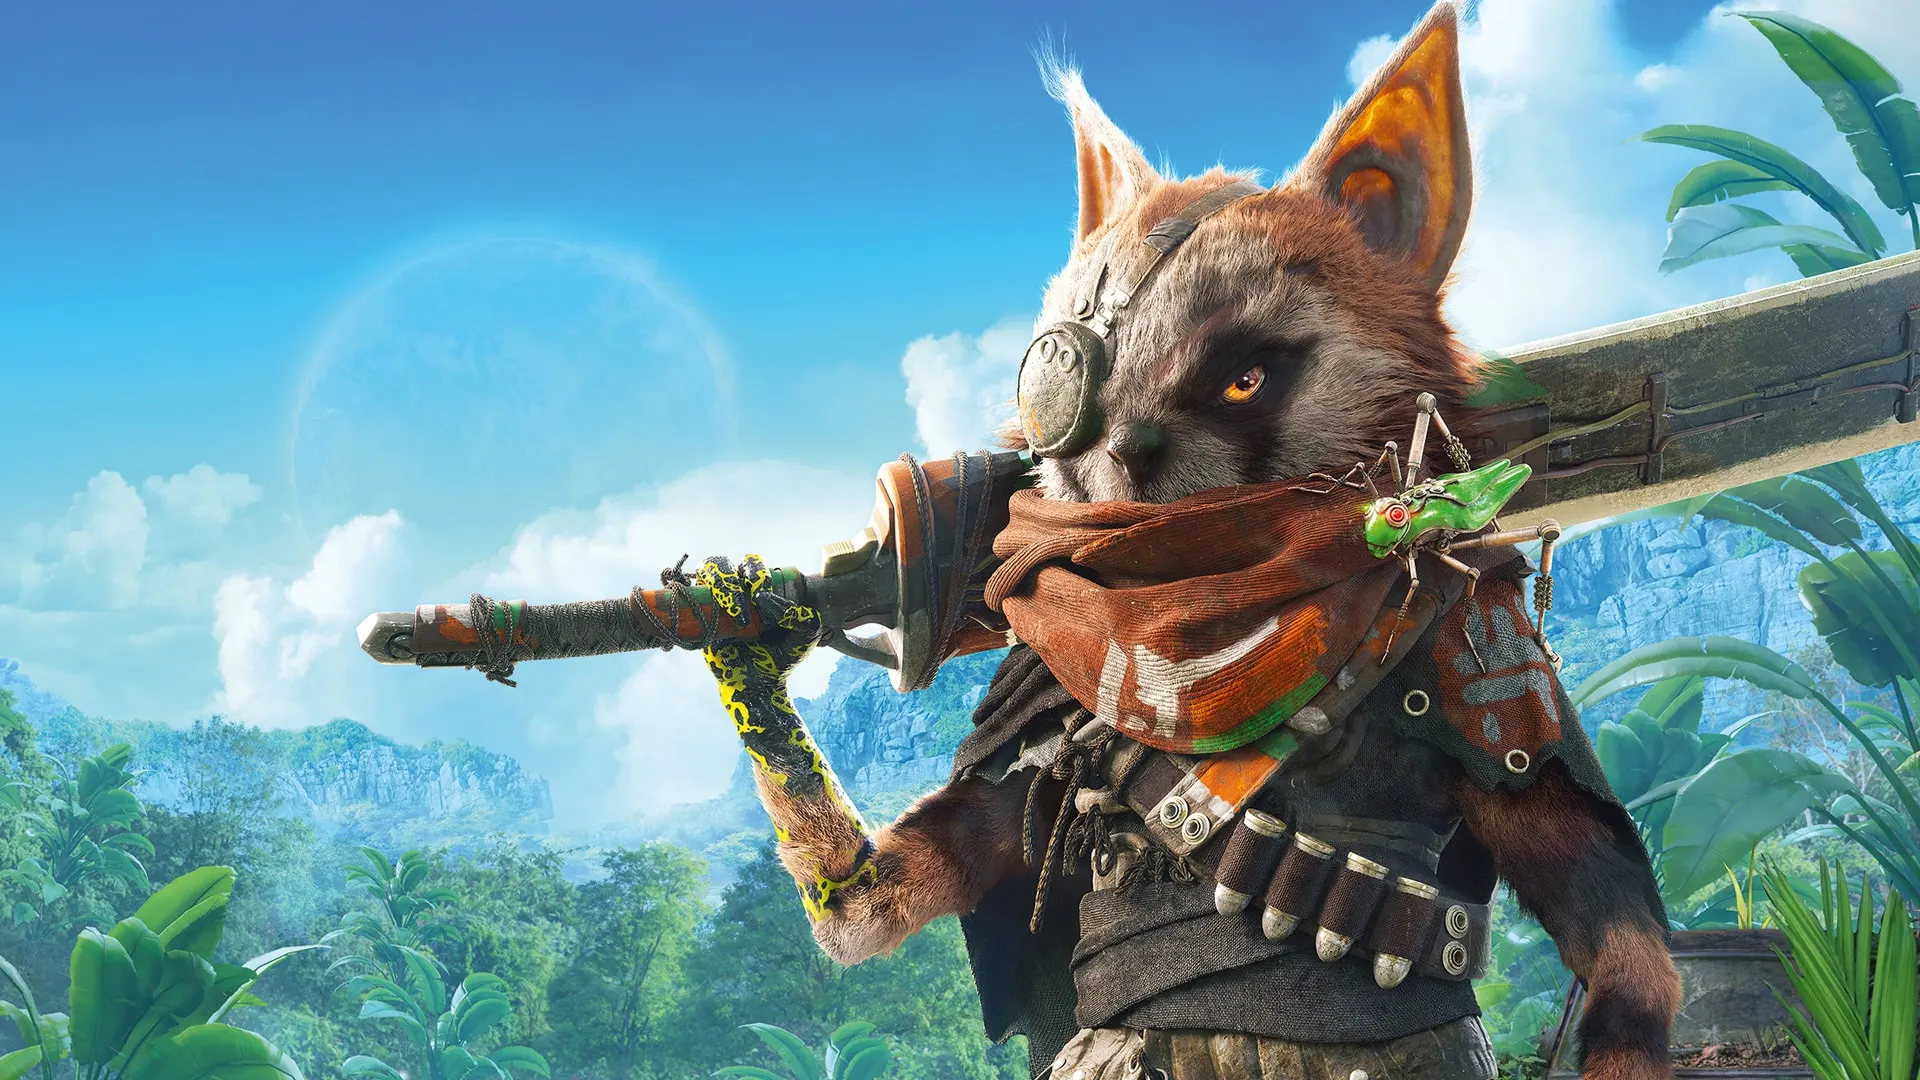 is biomutant on ps5